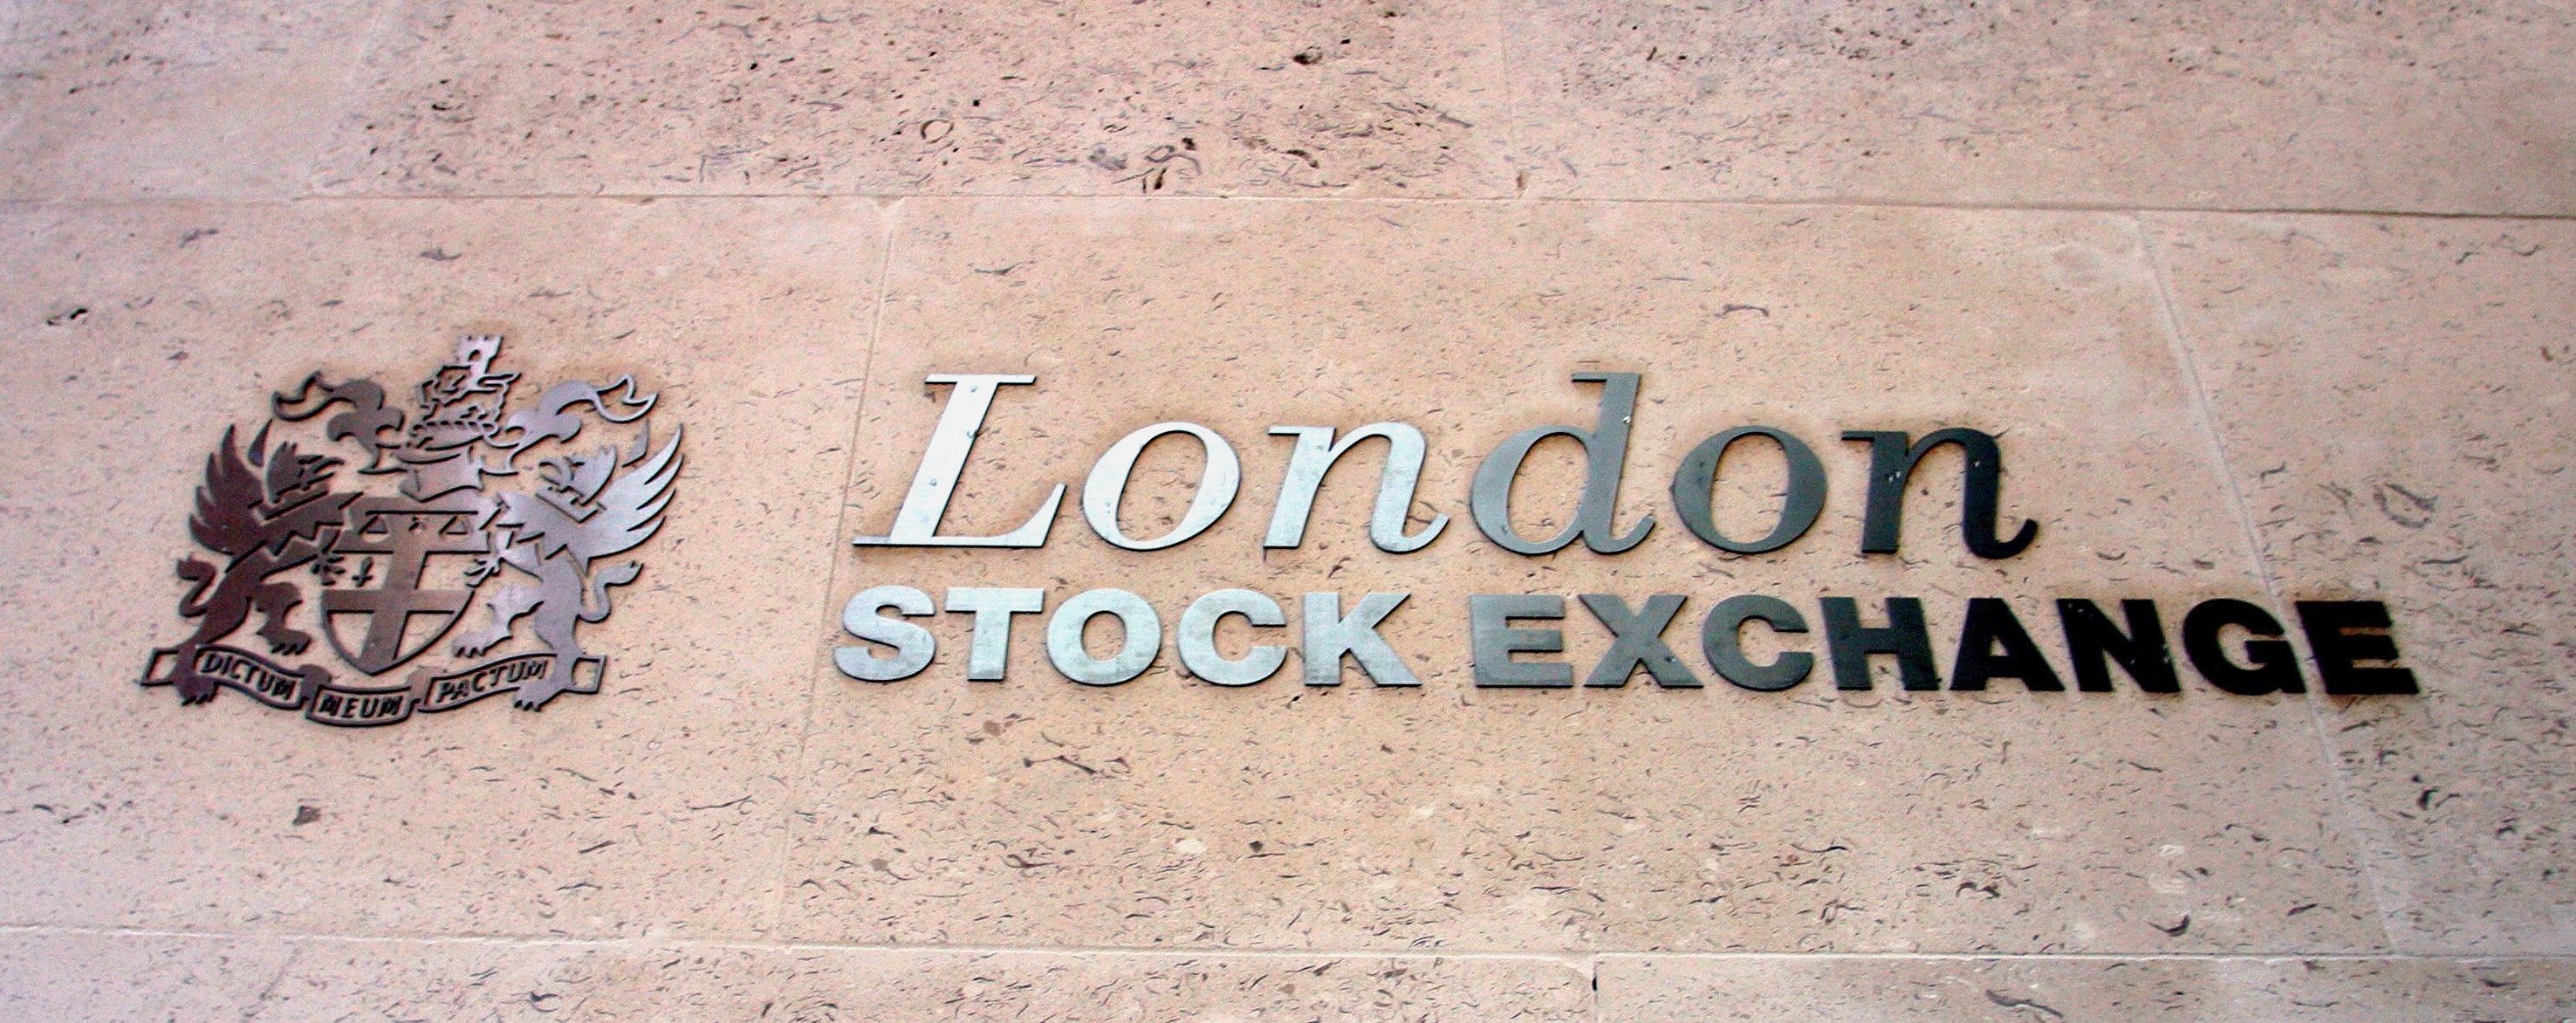 TechFinancials Shares Now Trading on London Stock Exchange AIM as TECH